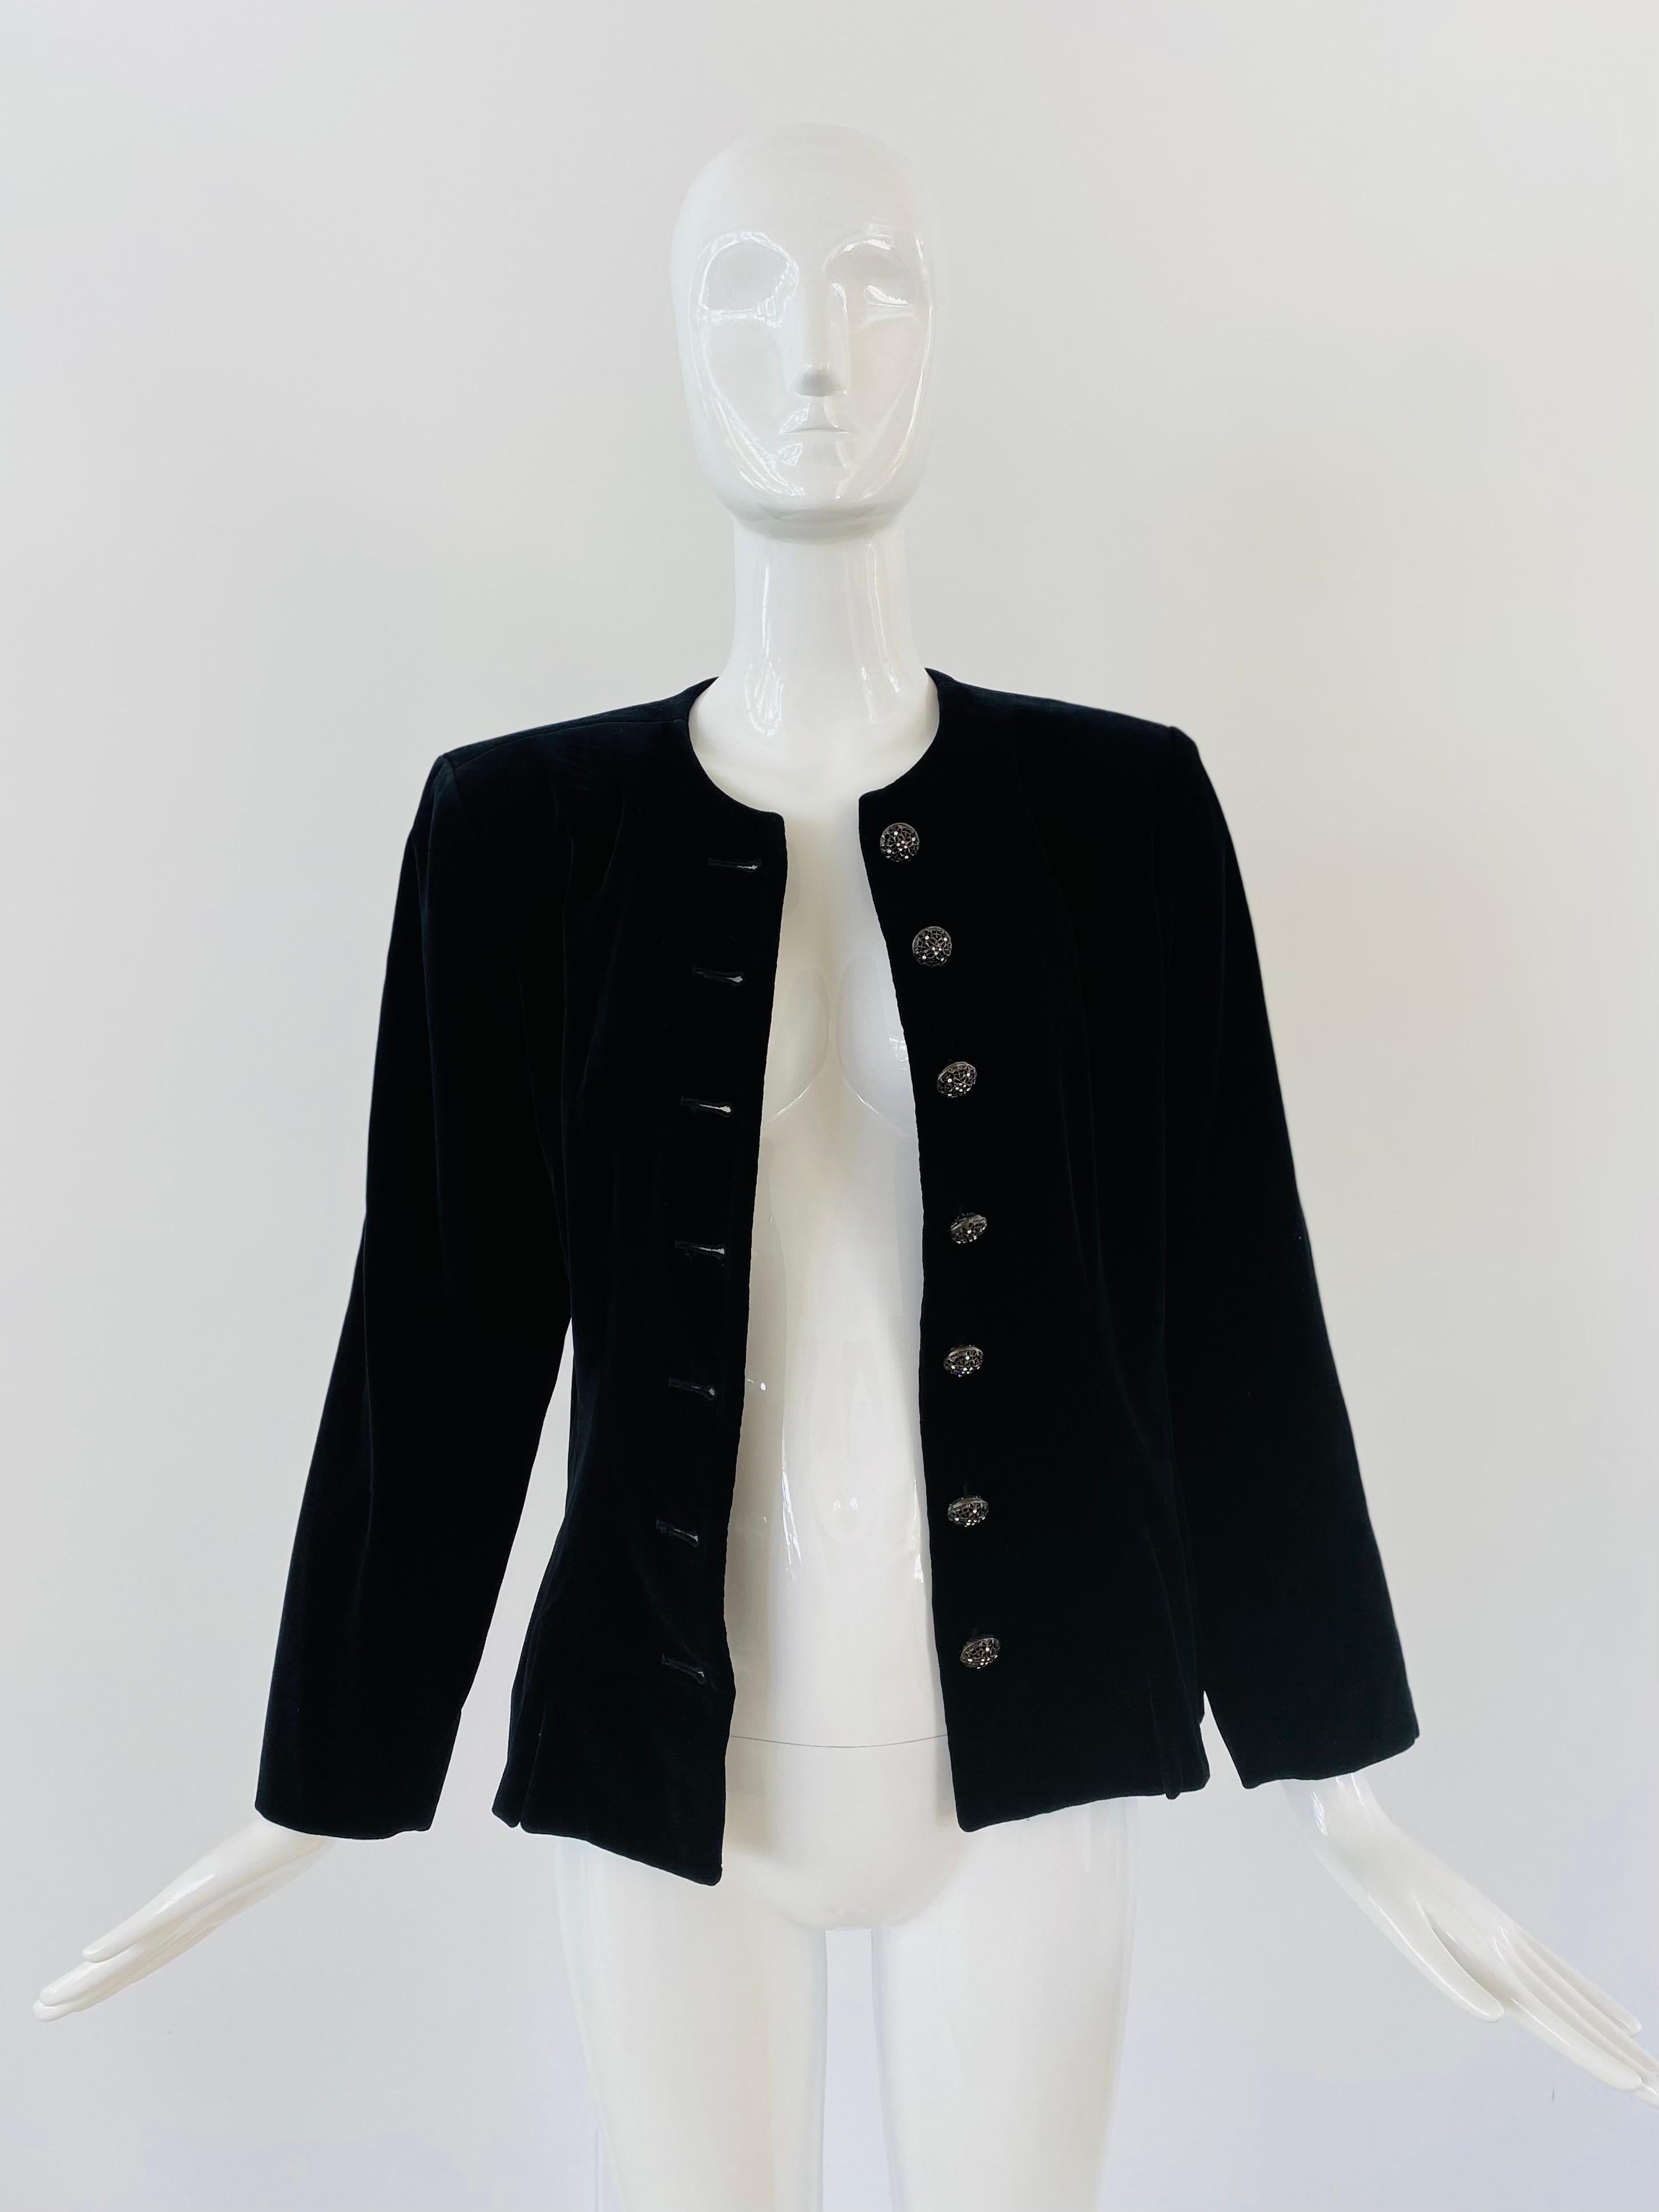 
The early 1990s Yves Saint Laurent Rive Gauche velvet evening jacket is a timeless wardrobe piece that captures the essence of luxury and sophistication. The rich velvet fabric is soft and plush, with a deep, rich black color that exudes elegance